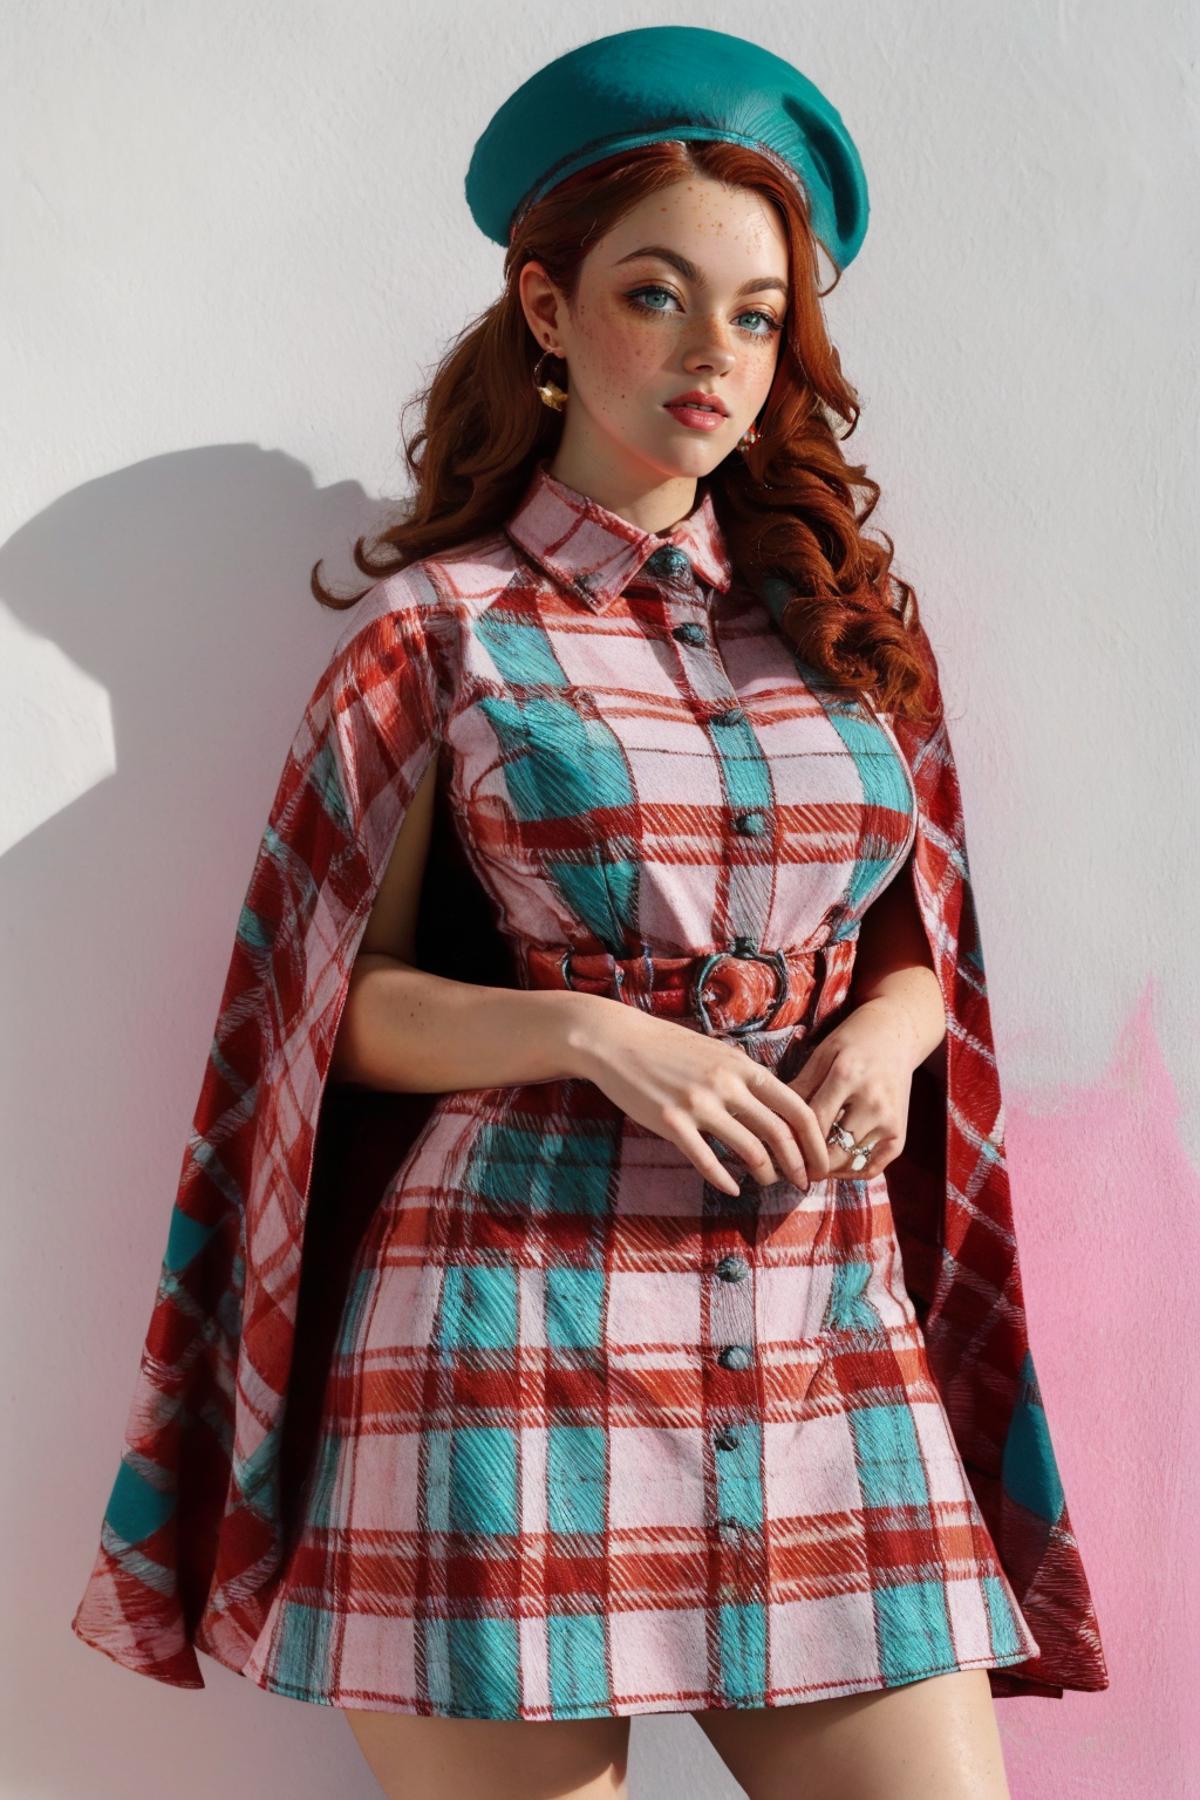 Plaid Dress with attached Cape image by freckledvixon